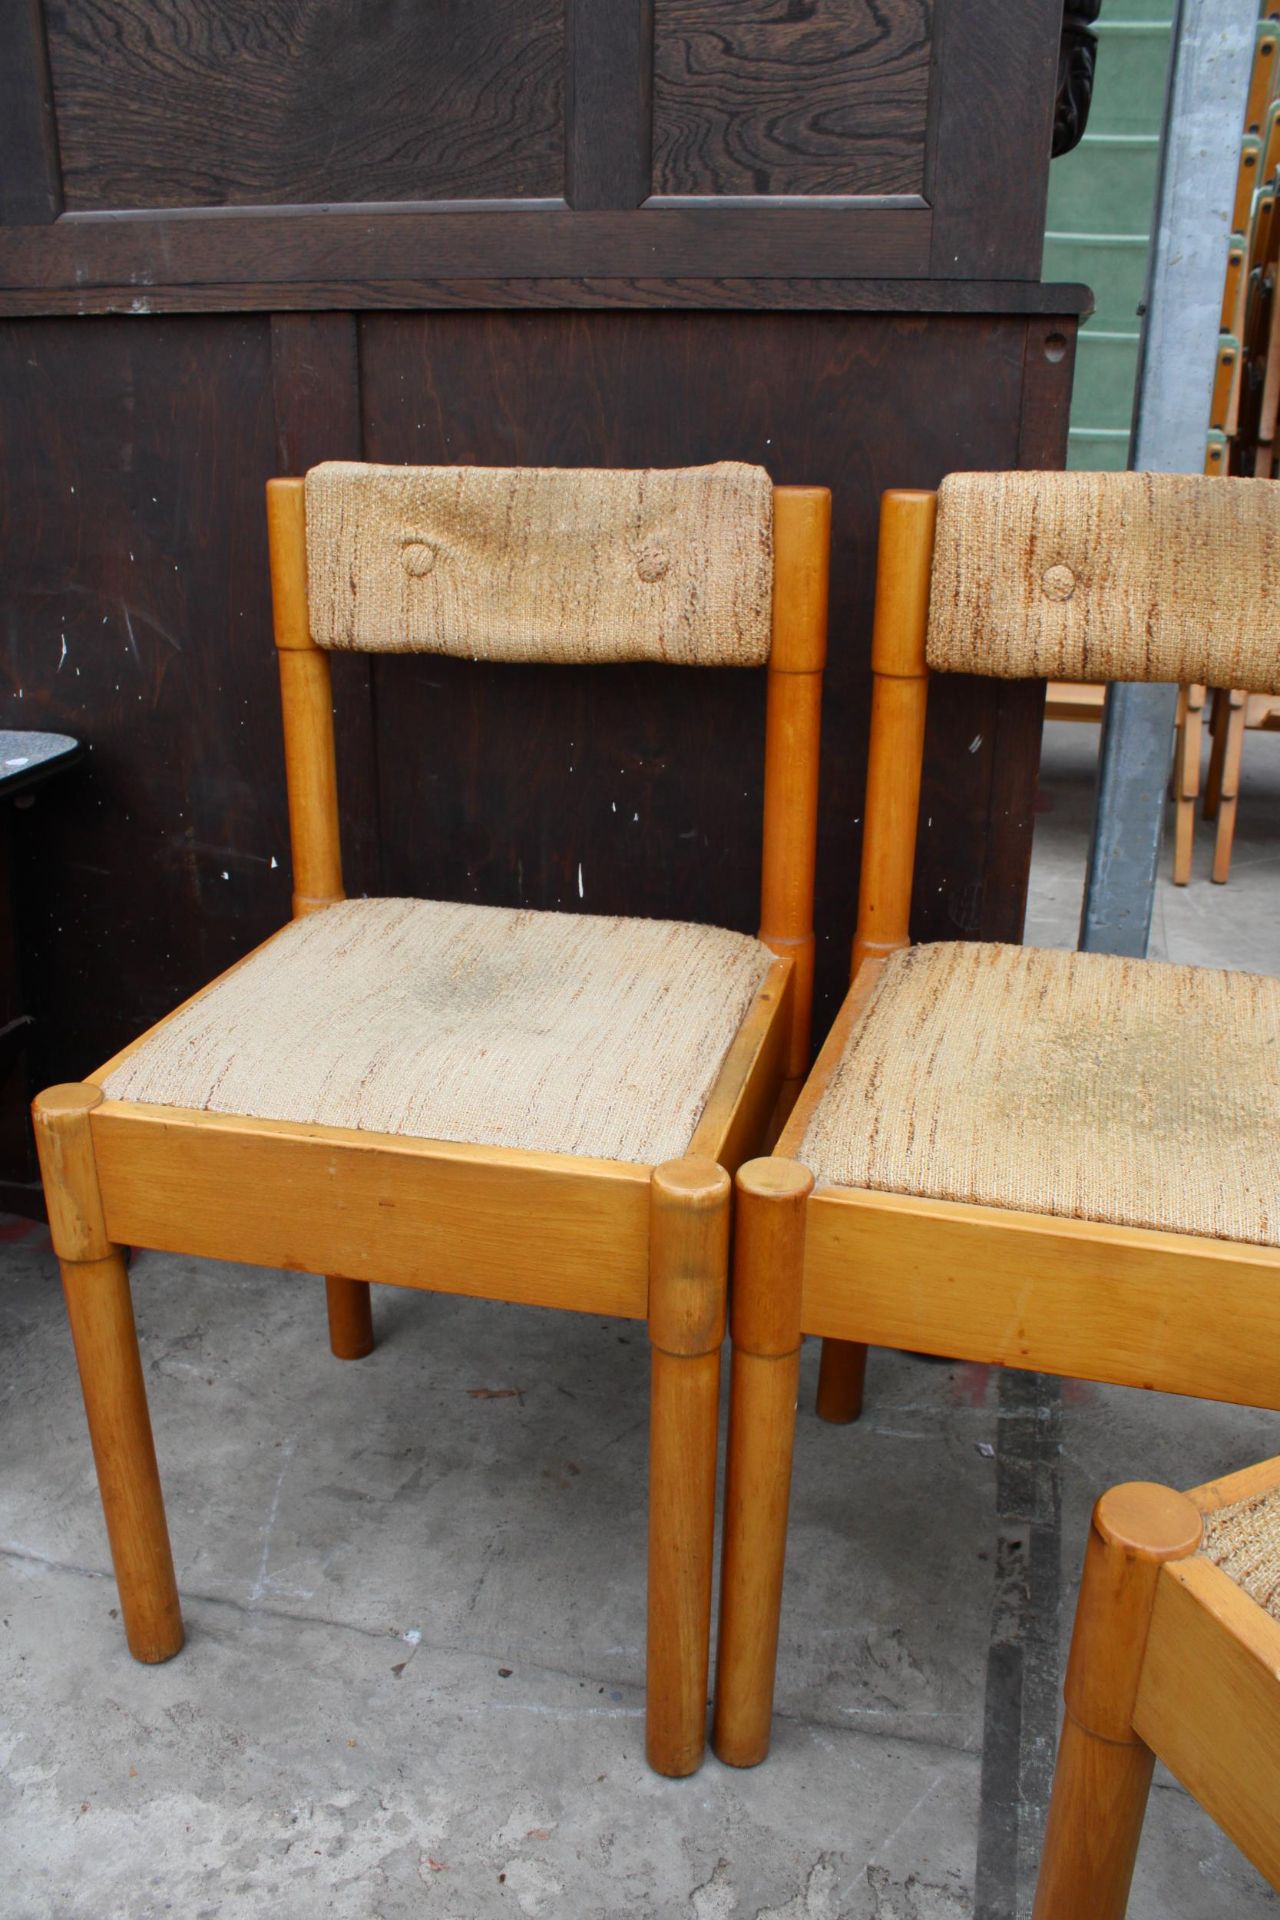 THREE RETRO DINETTE DINING CHAIRS - Image 2 of 3